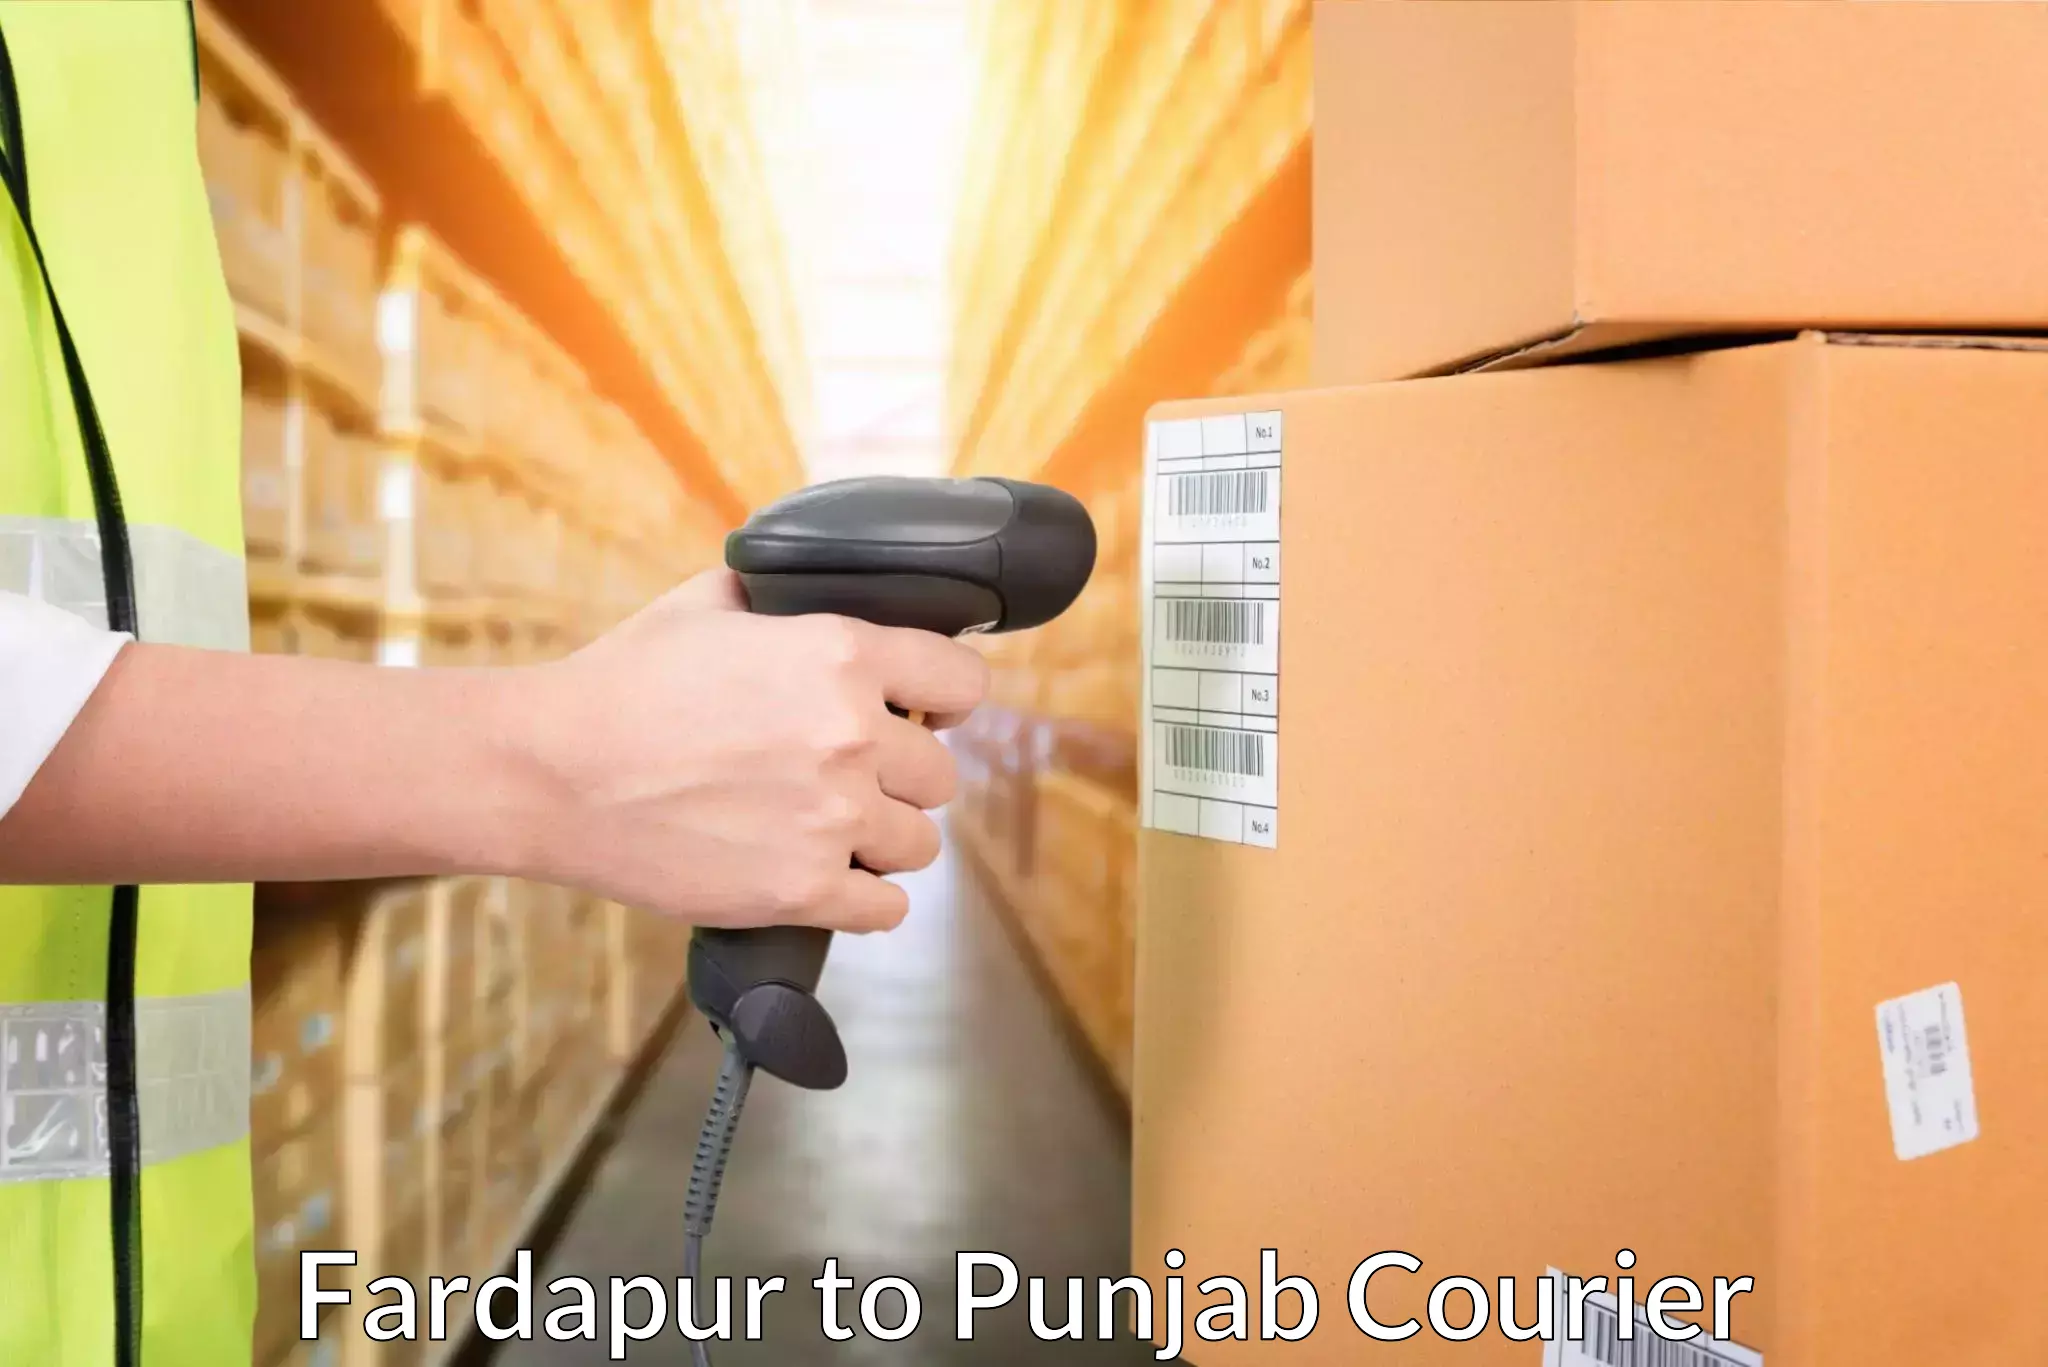 Efficient courier operations Fardapur to Talwandi Sabo